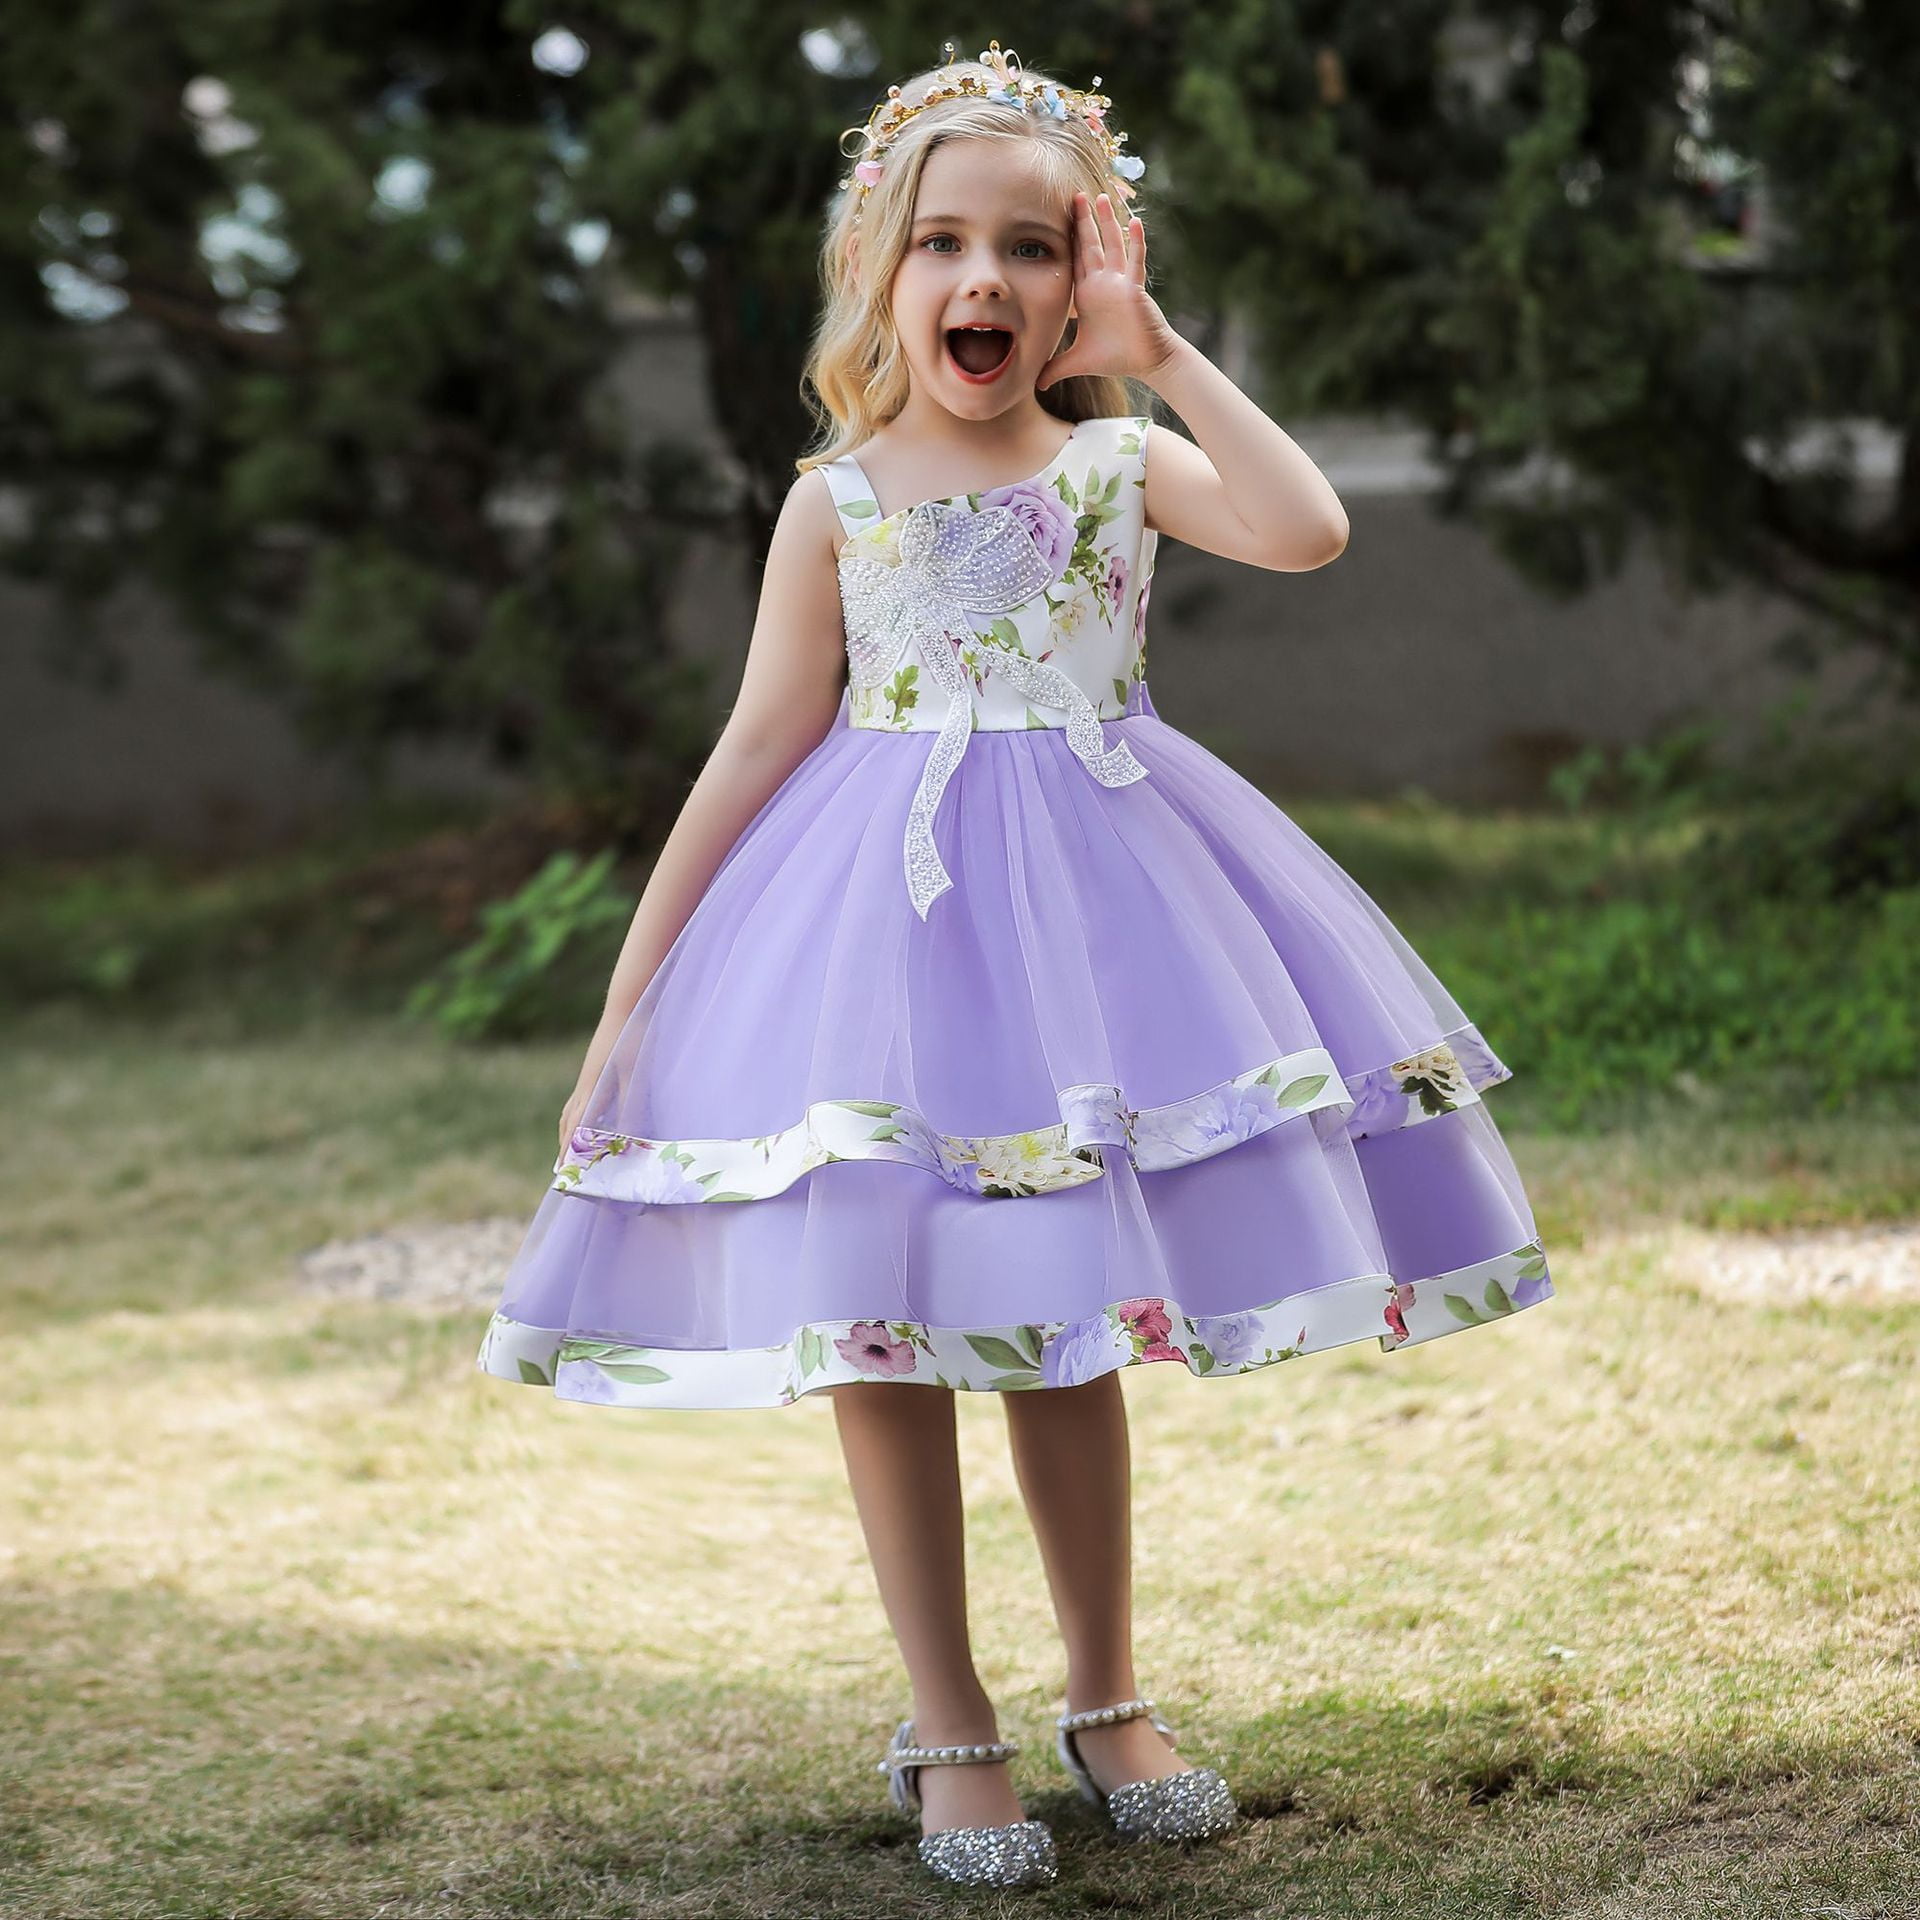 Jeweled Black Satin Tiered Tulle Flower Girl Dress Perfect For Formal Wear,  Weddings, Parties, And First Communion From Lilliantan, $67.57 | DHgate.Com